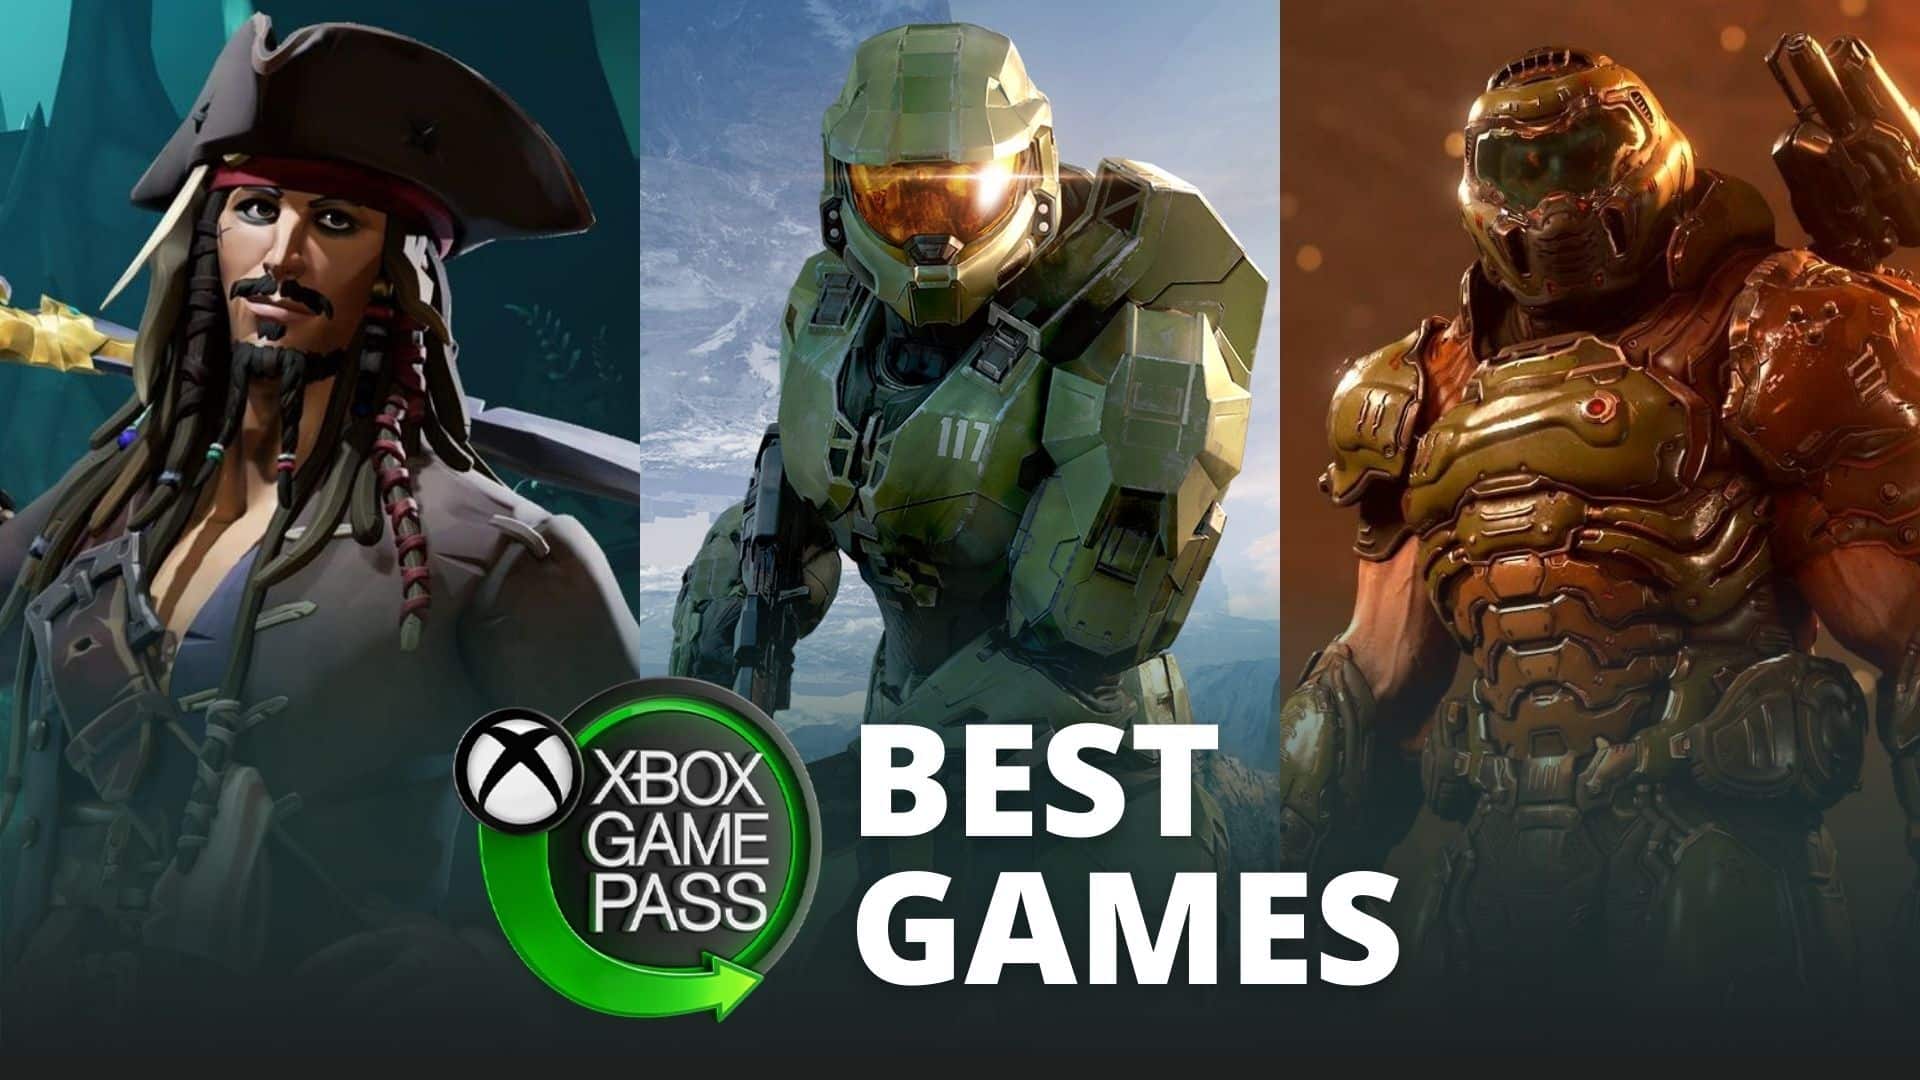 Xbox Game Pass徽標與Jack Sparrow，Master Chief and Doomslayer